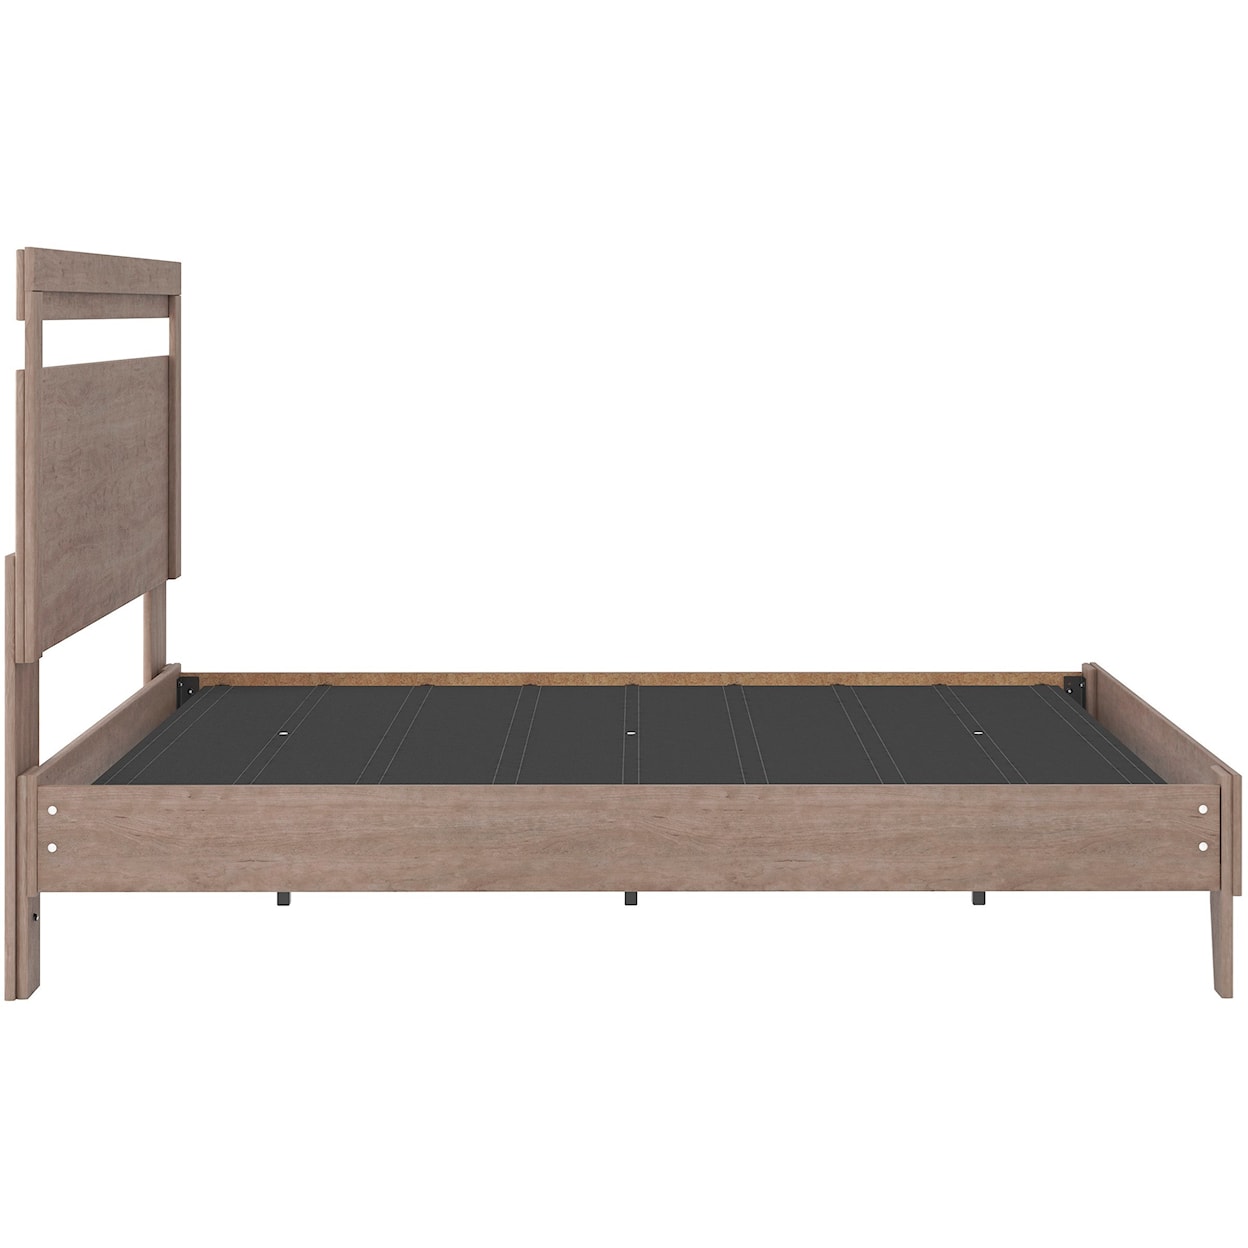 Signature Design by Ashley Flannia Queen Panel Platform Bed